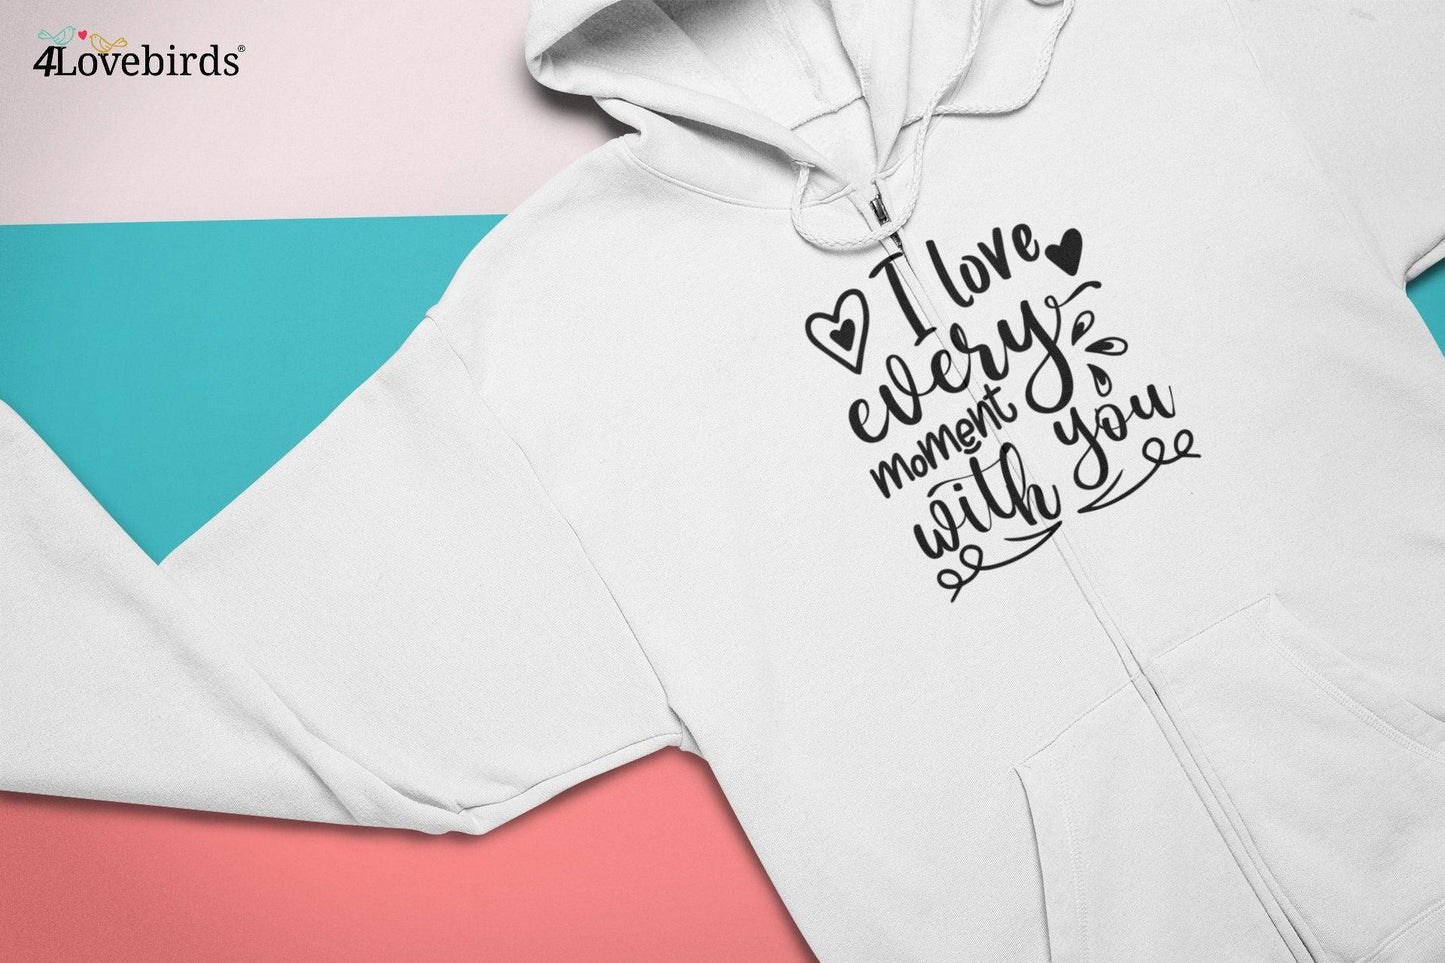 I love every moment with you Hoodie, Lovers T-shirt, Gift for Couples, Valentine Sweatshirt, Boyfriend / Girlfriend Longsleeve, Cute Tshirt - 4Lovebirds